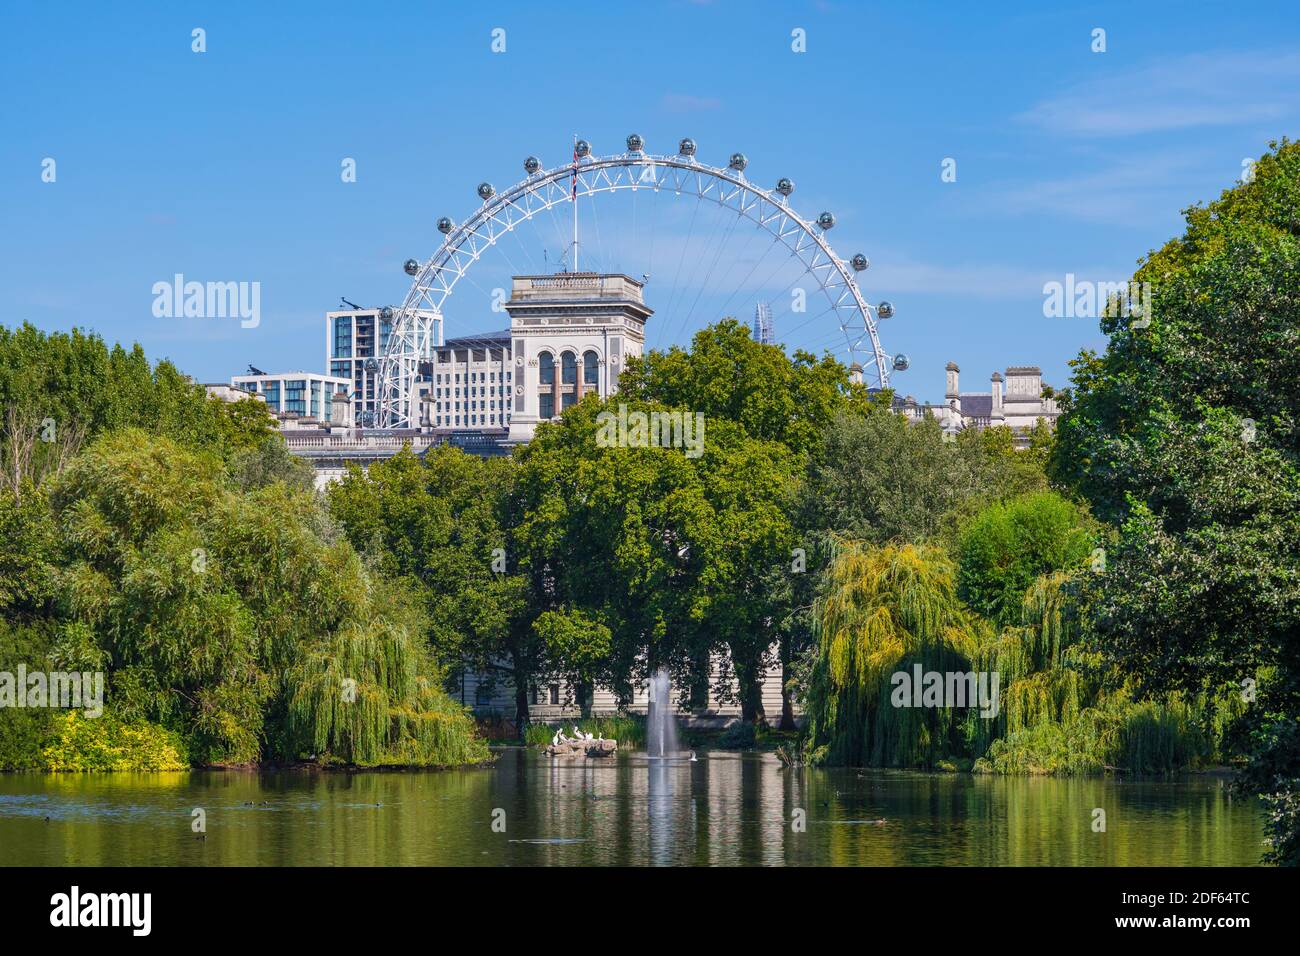 View of the Coca-Cola London Eye across the lake from St. James's Park, City of Westminster, City of London, England, UK. Stock Photo